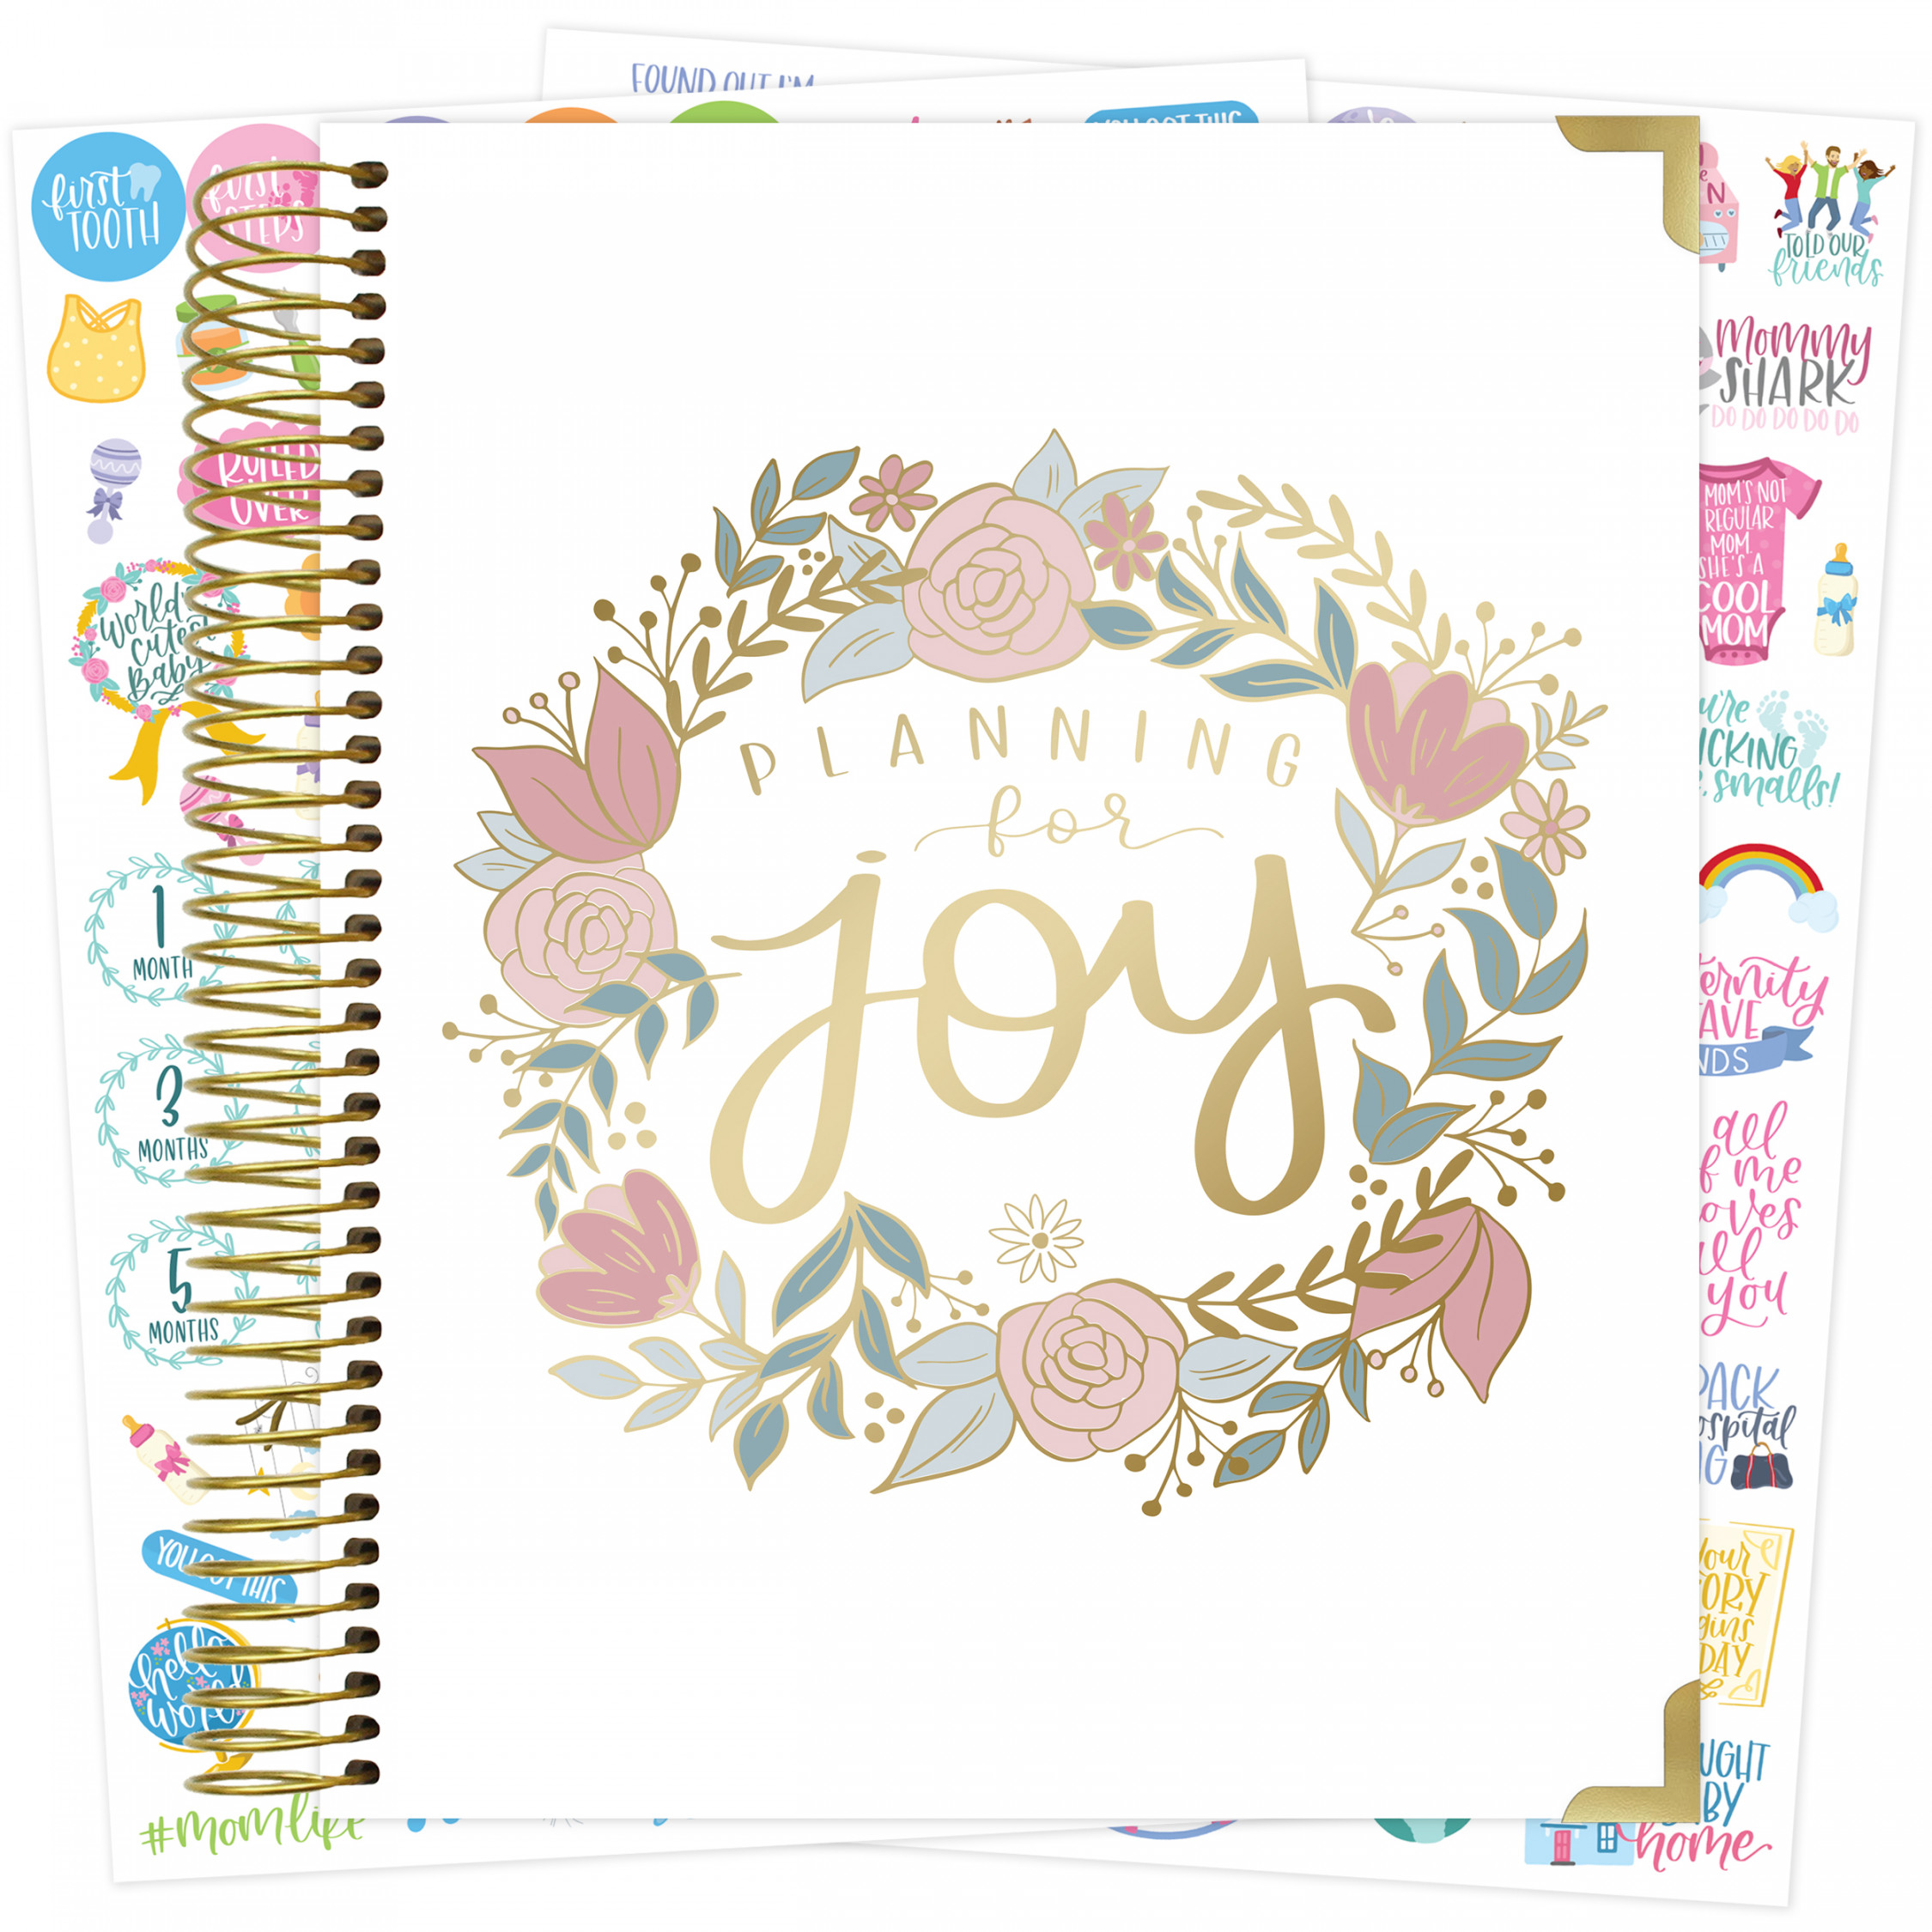 bloom daily planners Pregnancy & Baby&#;s First Year Planner & Calendar, " x  "